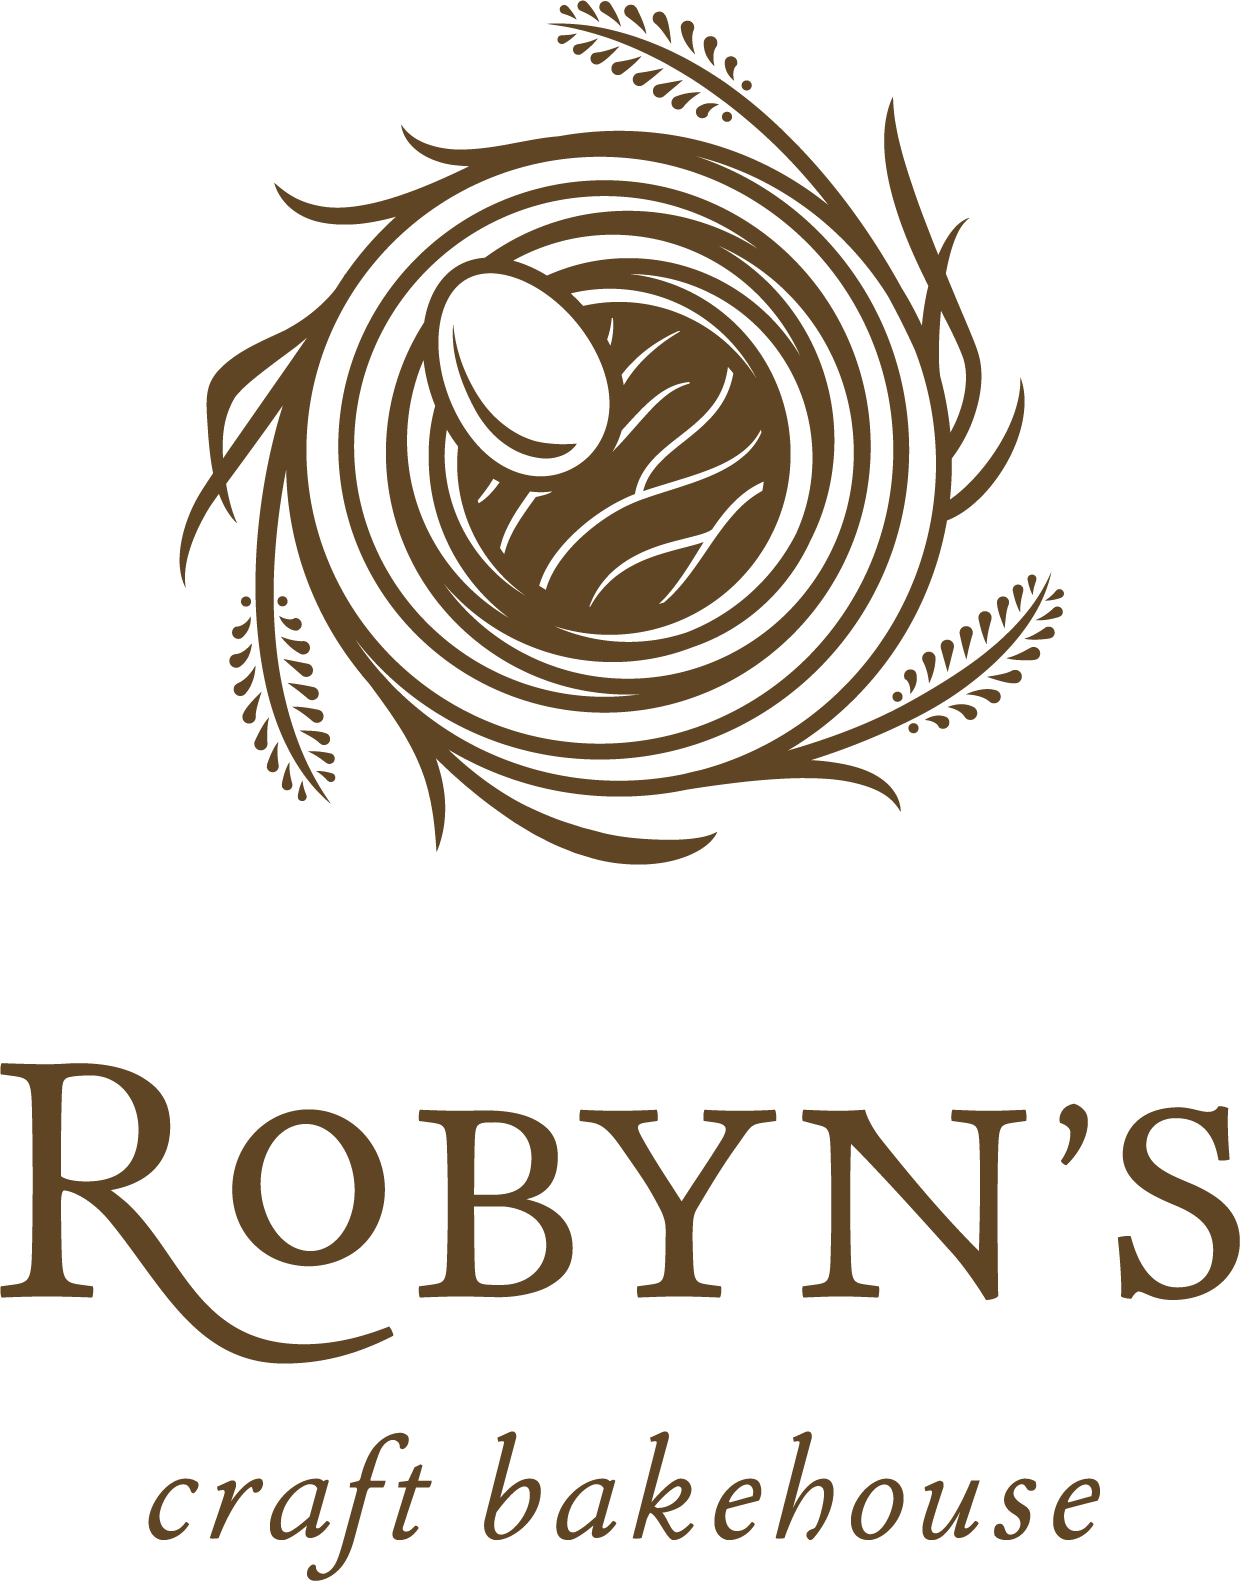 Robyn's Craft Bakehouse